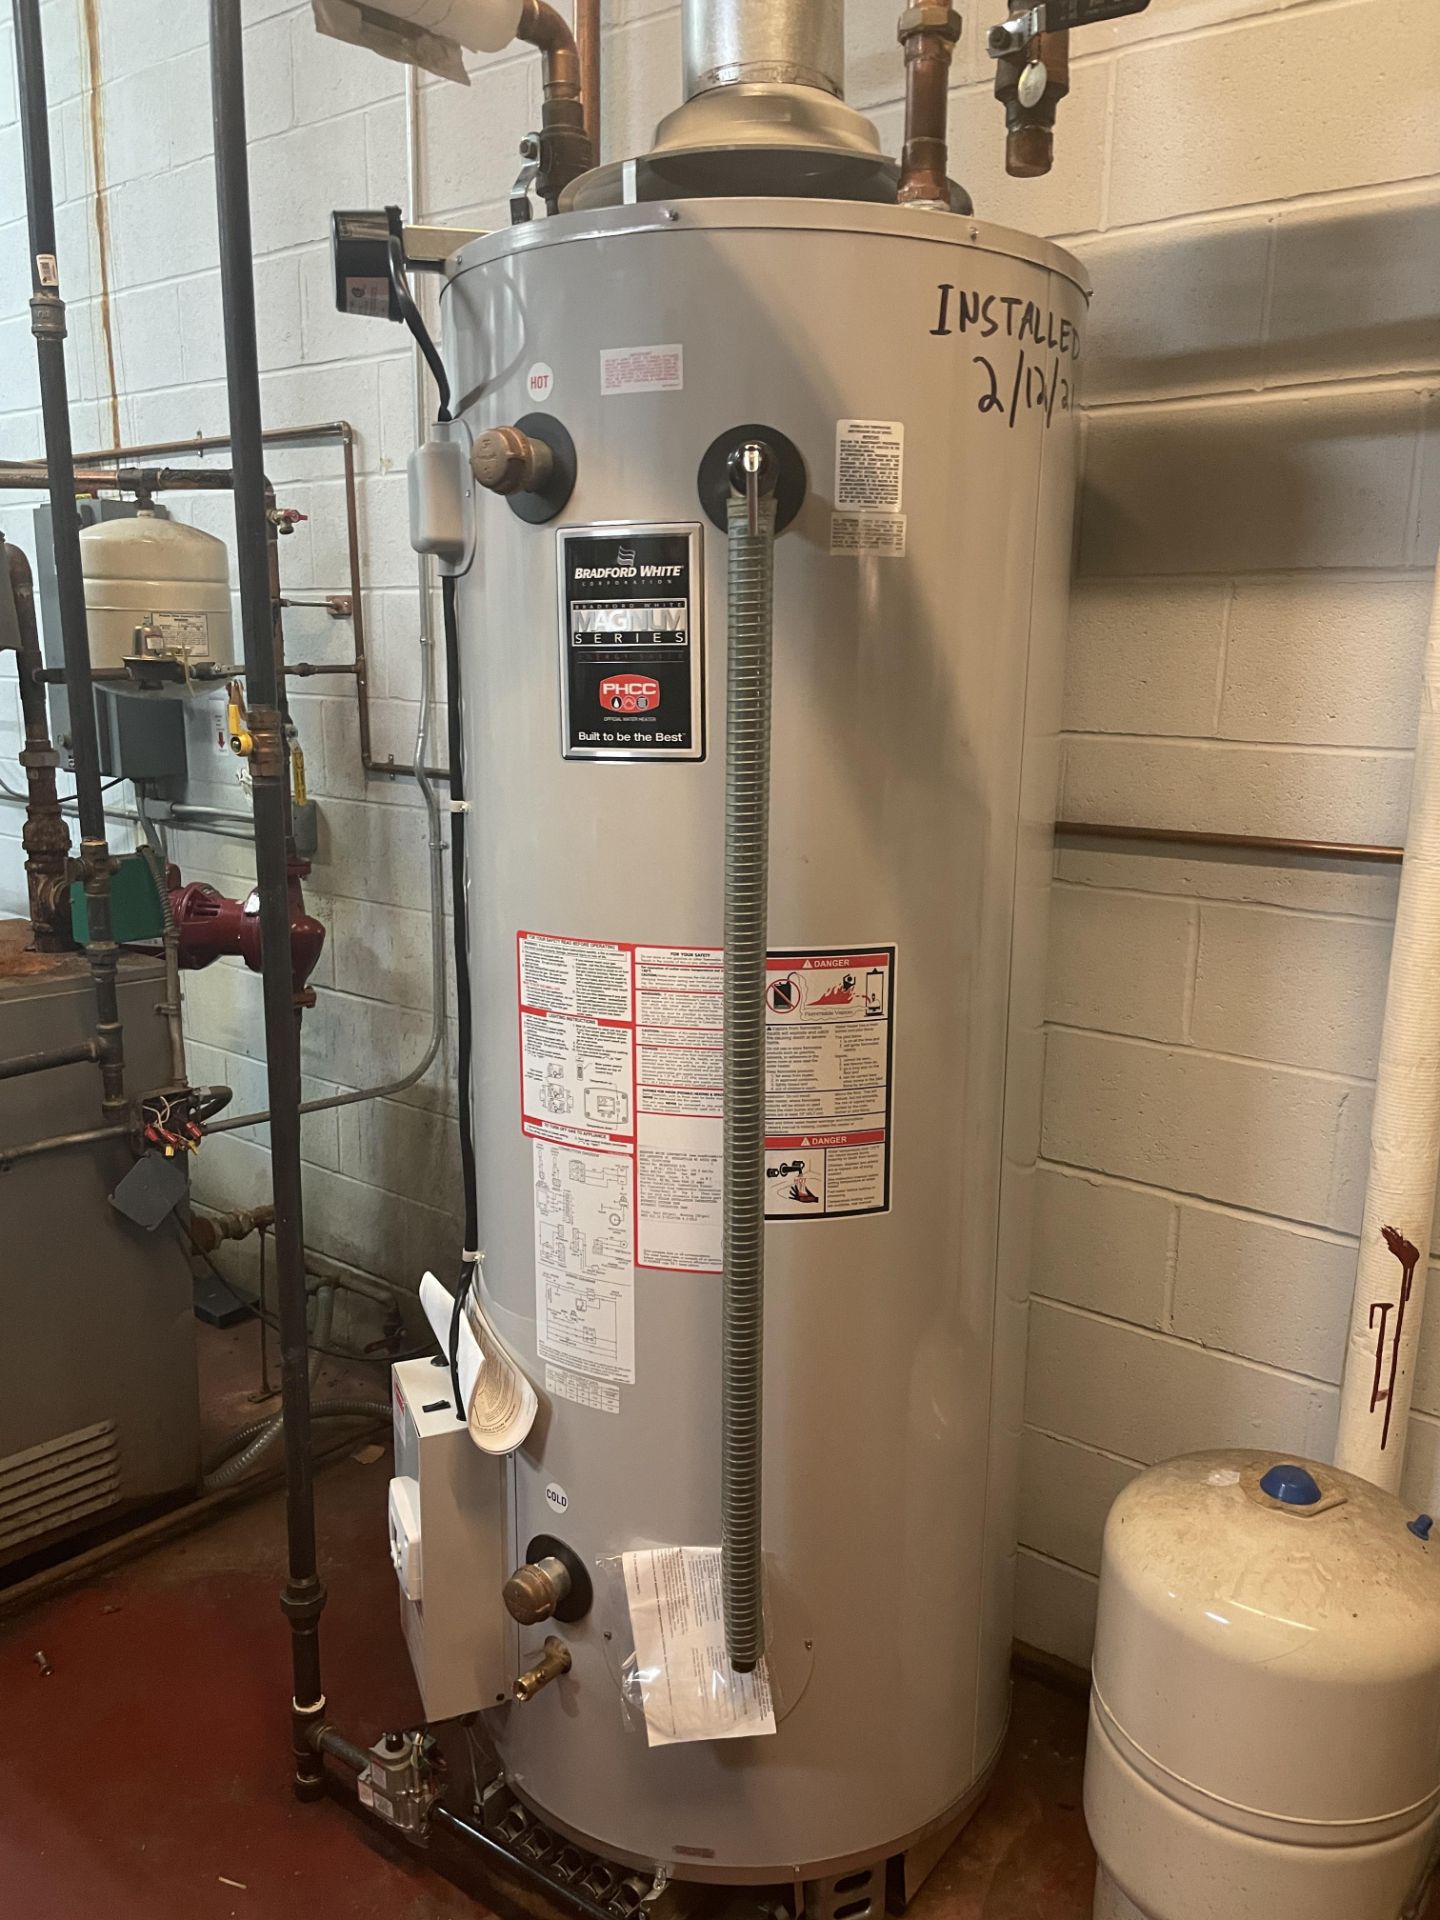 Bradford White Hot Water Heater, 98 gallon, gas fired. New 2013.